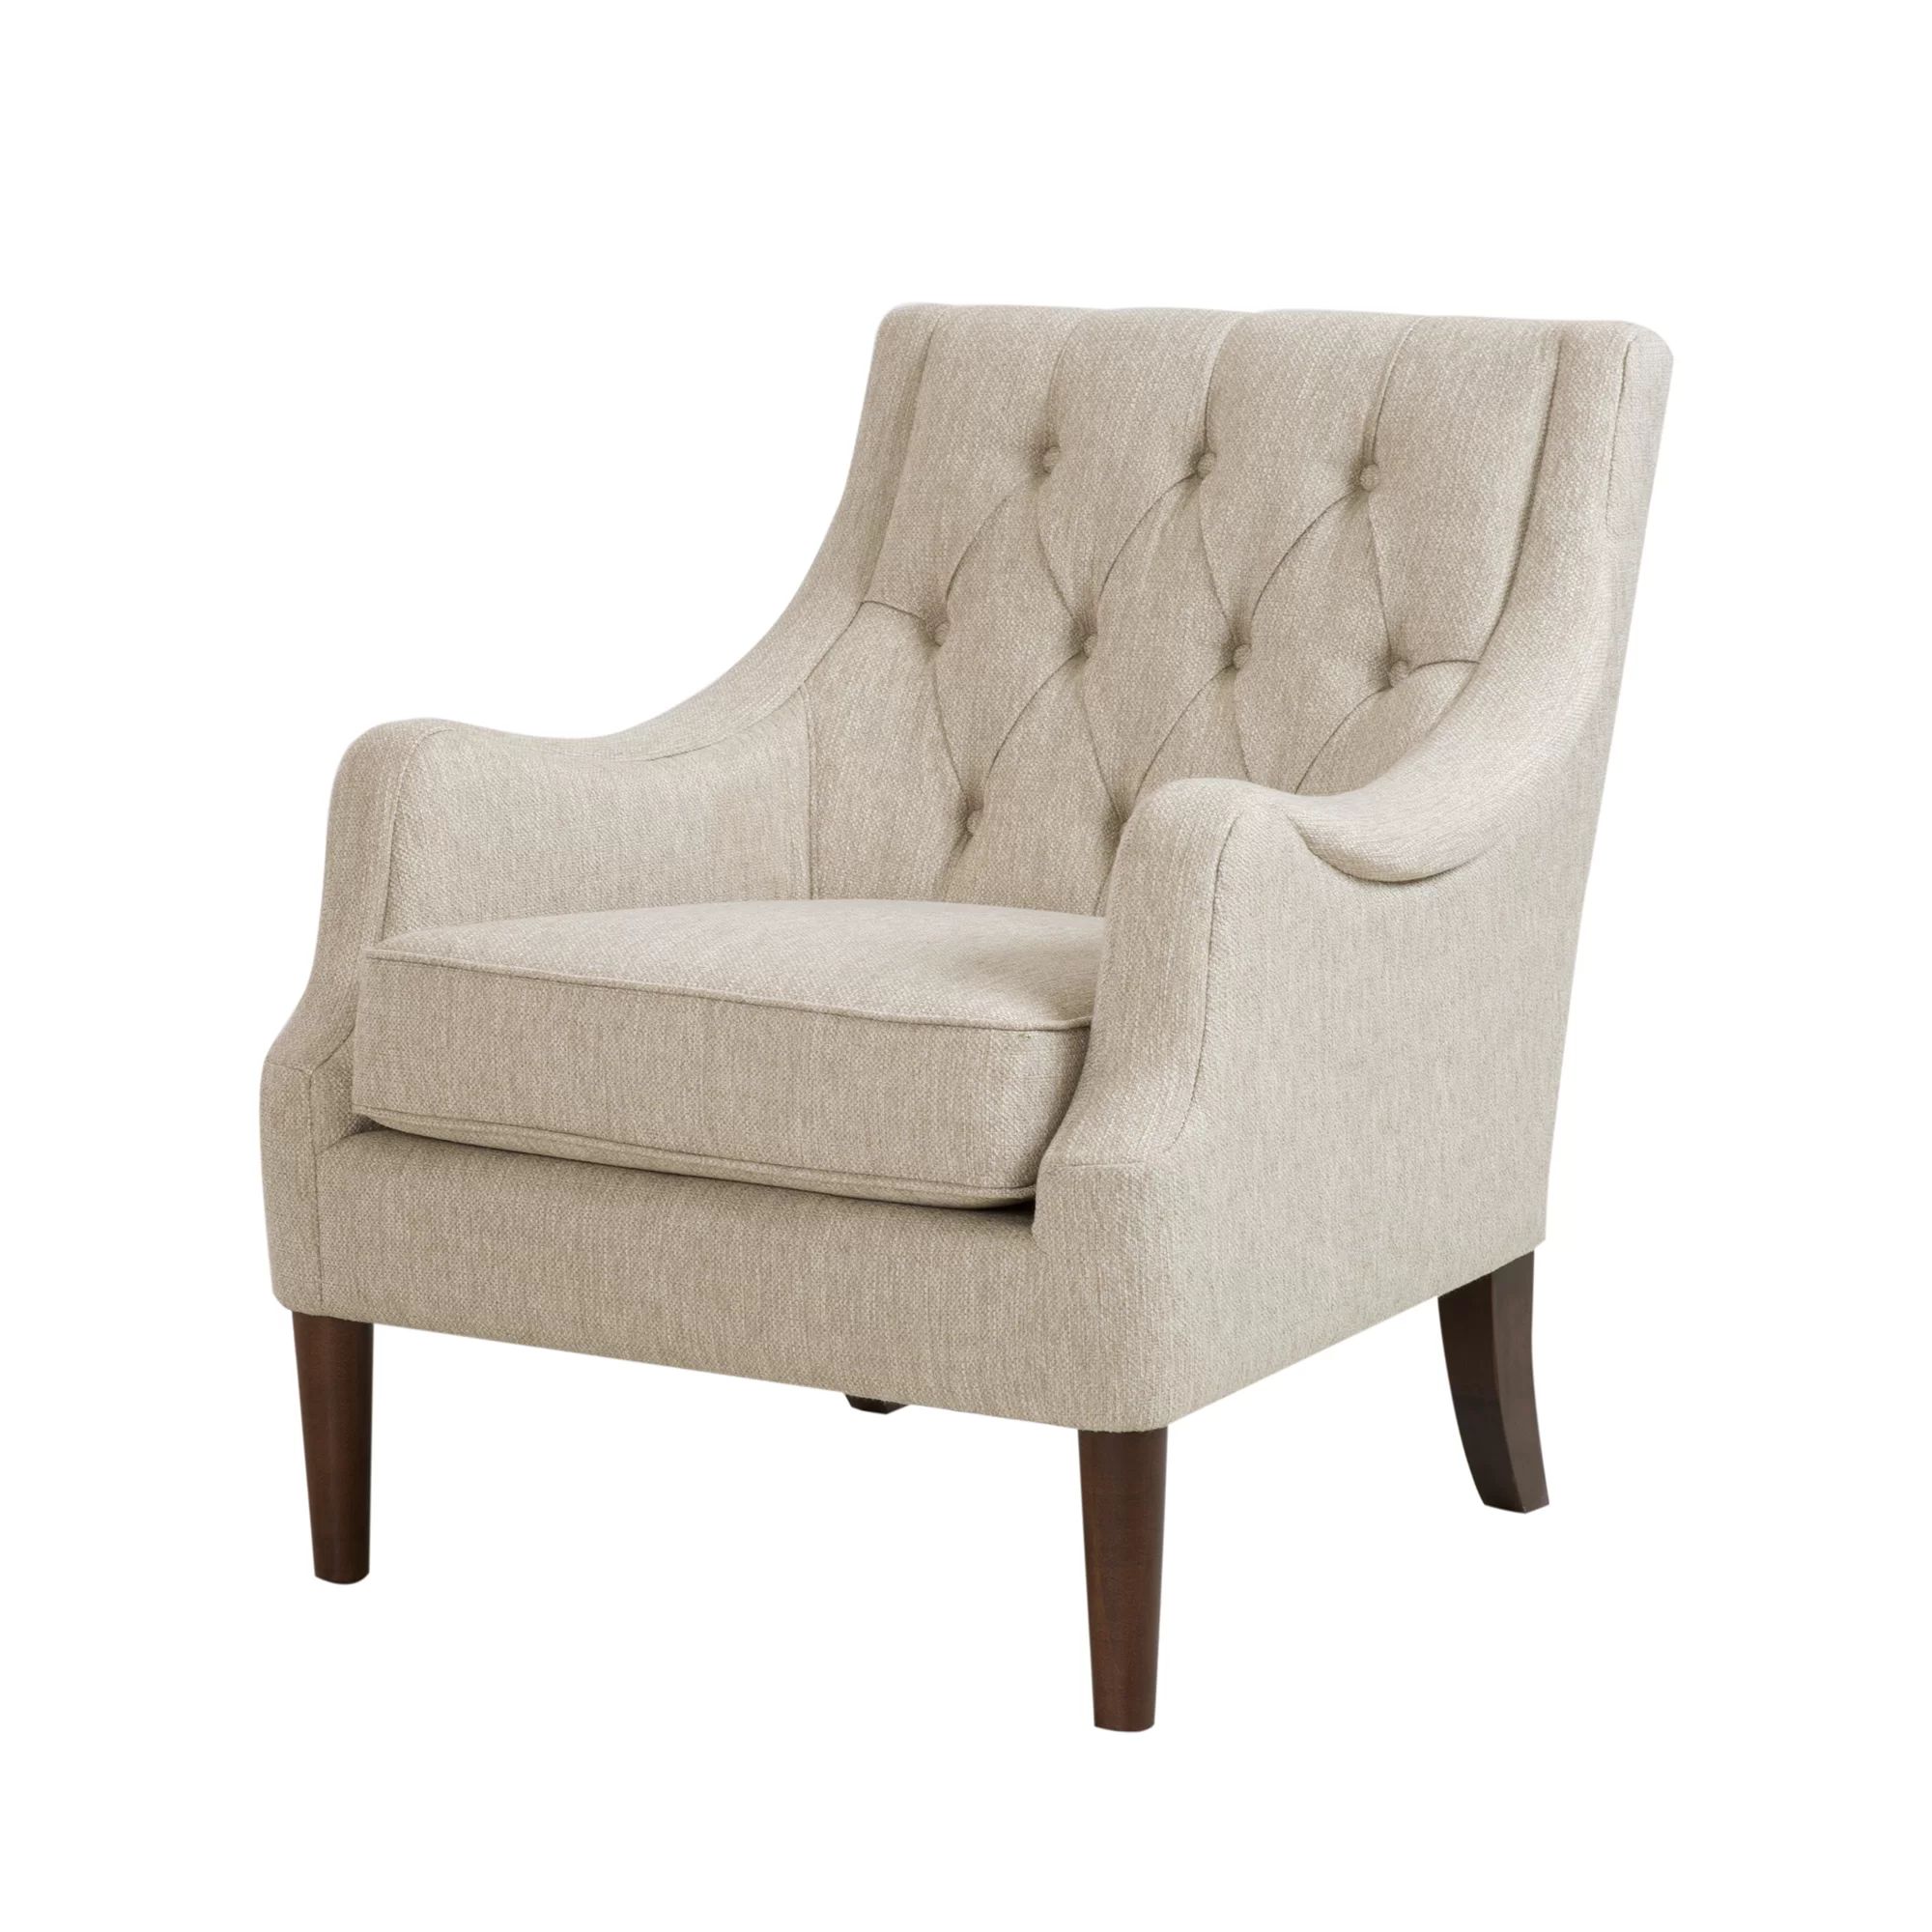 Galesville 29.25'' Wide Tufted Wingback Chair | Wayfair North America